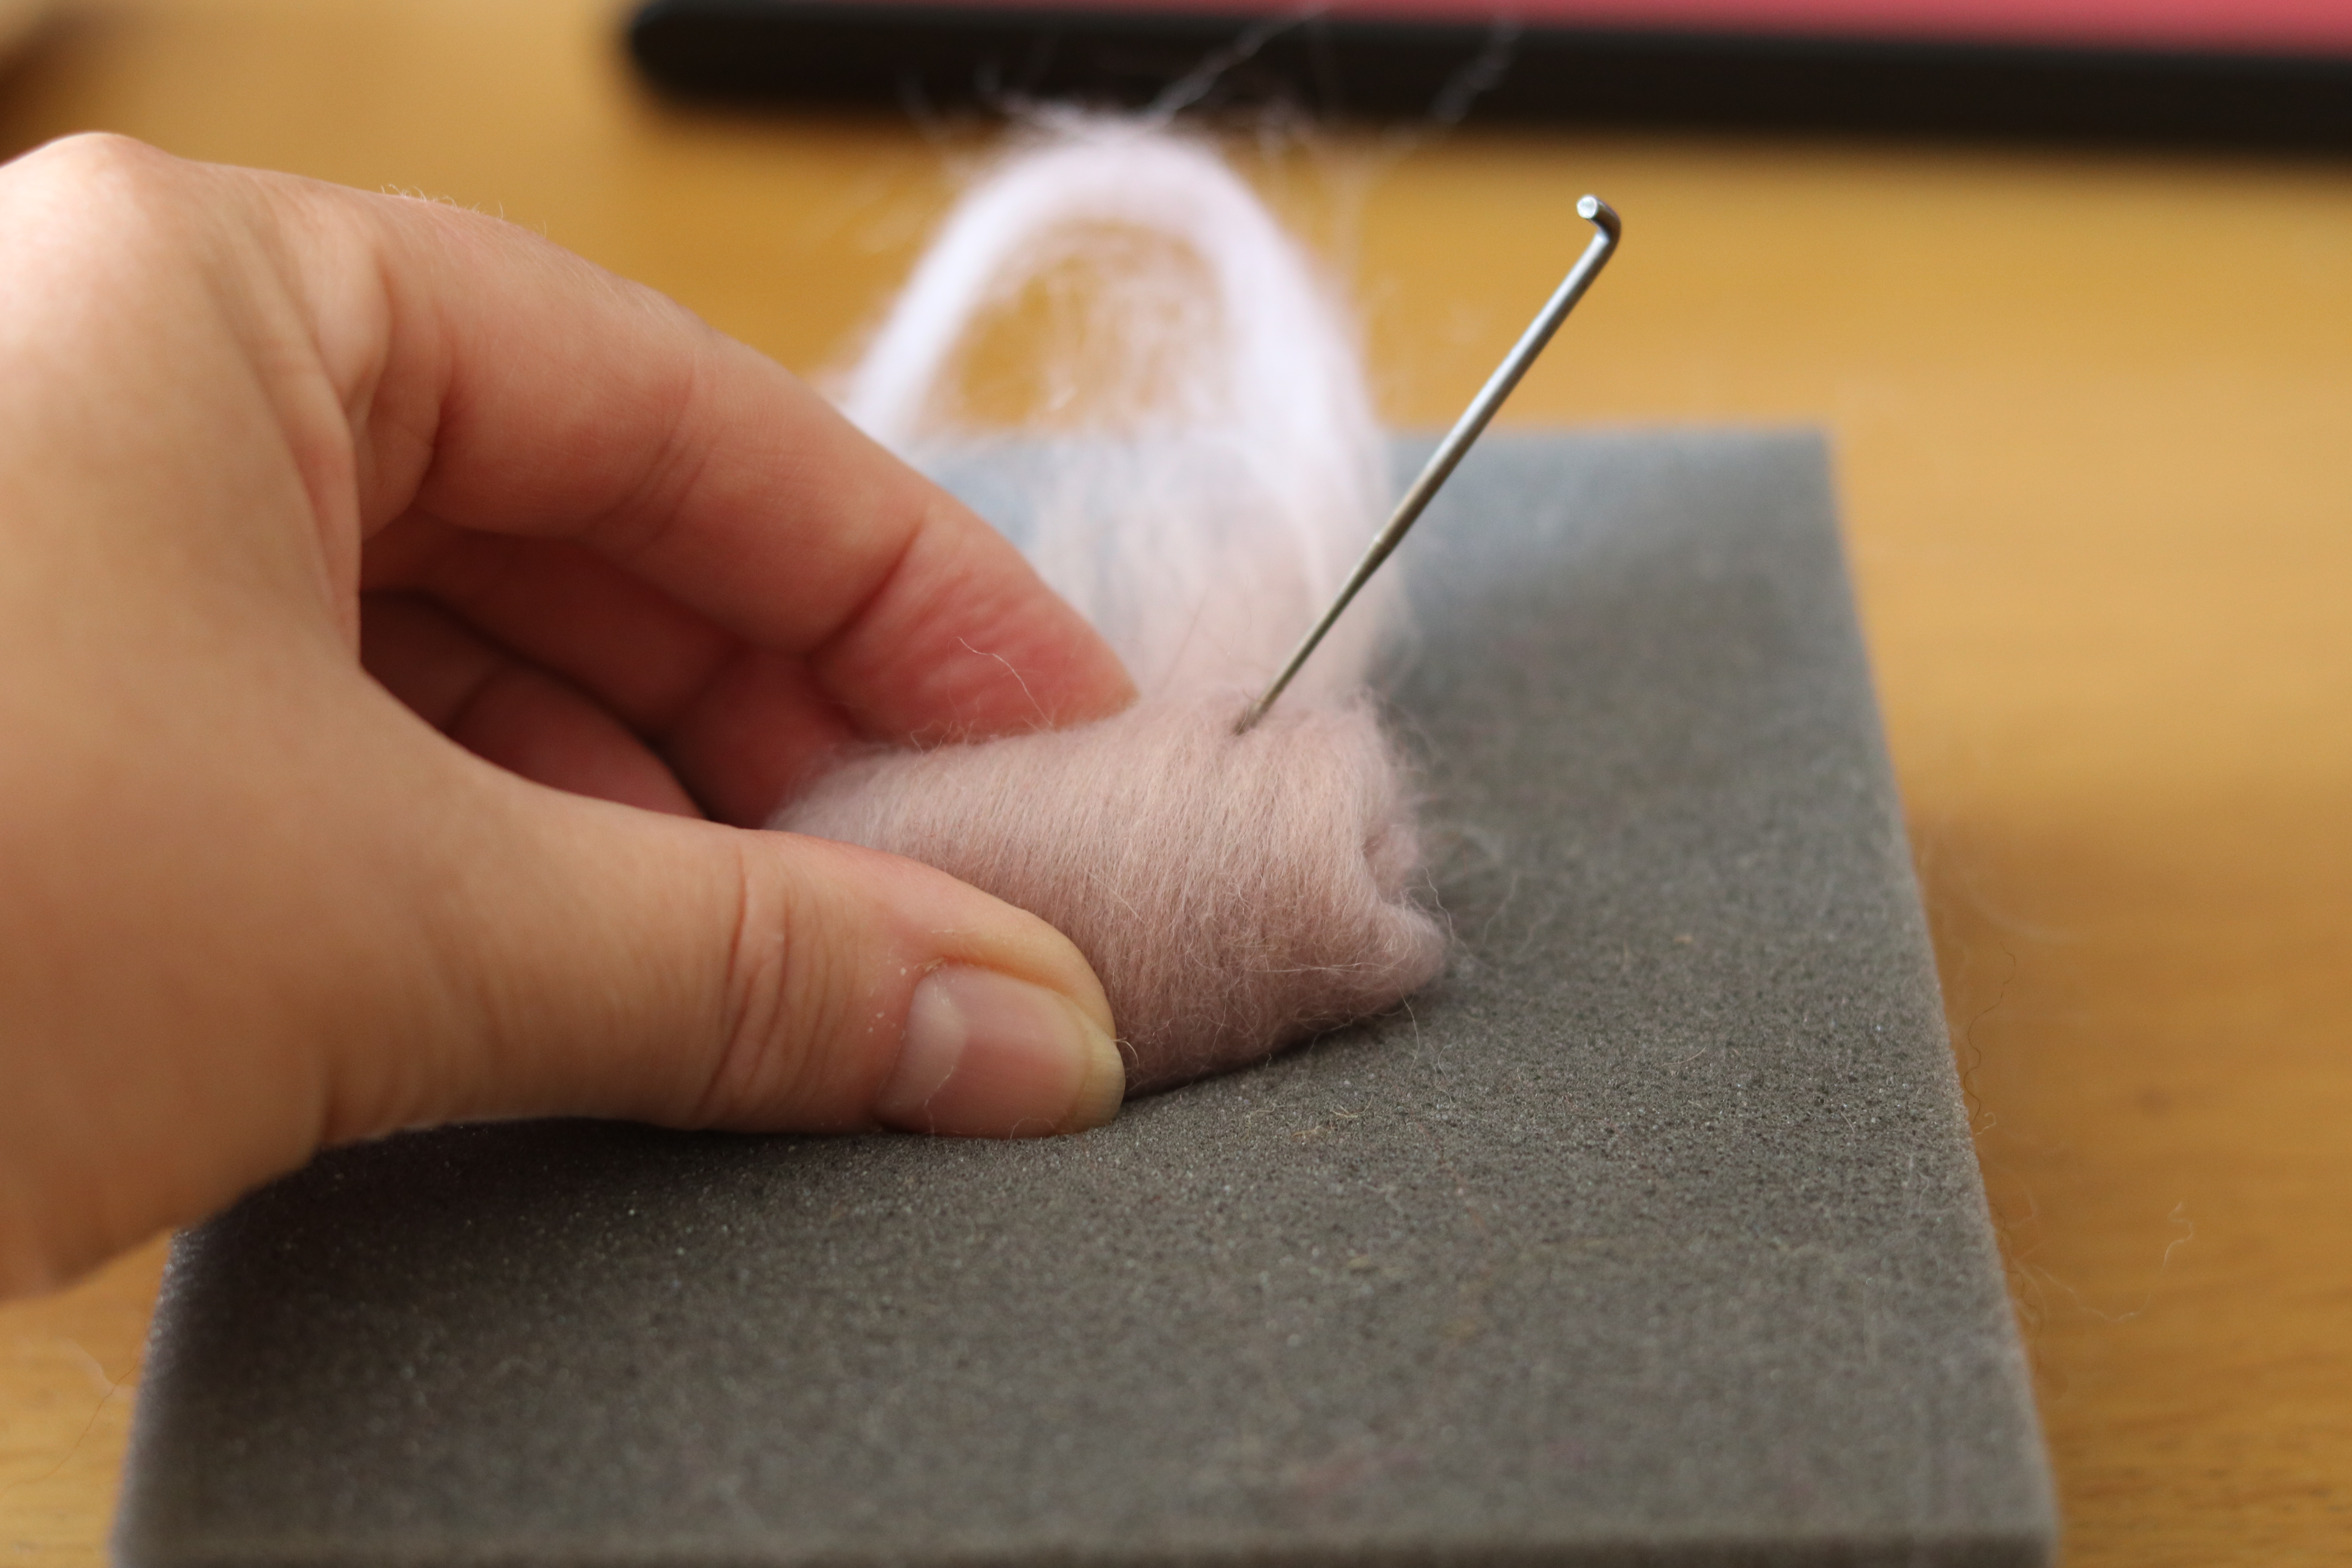 A close-up of a hand felting a small, pale pink wool shape with a needle on a grey foam block, with wool fluff scattered around and a blurred background.